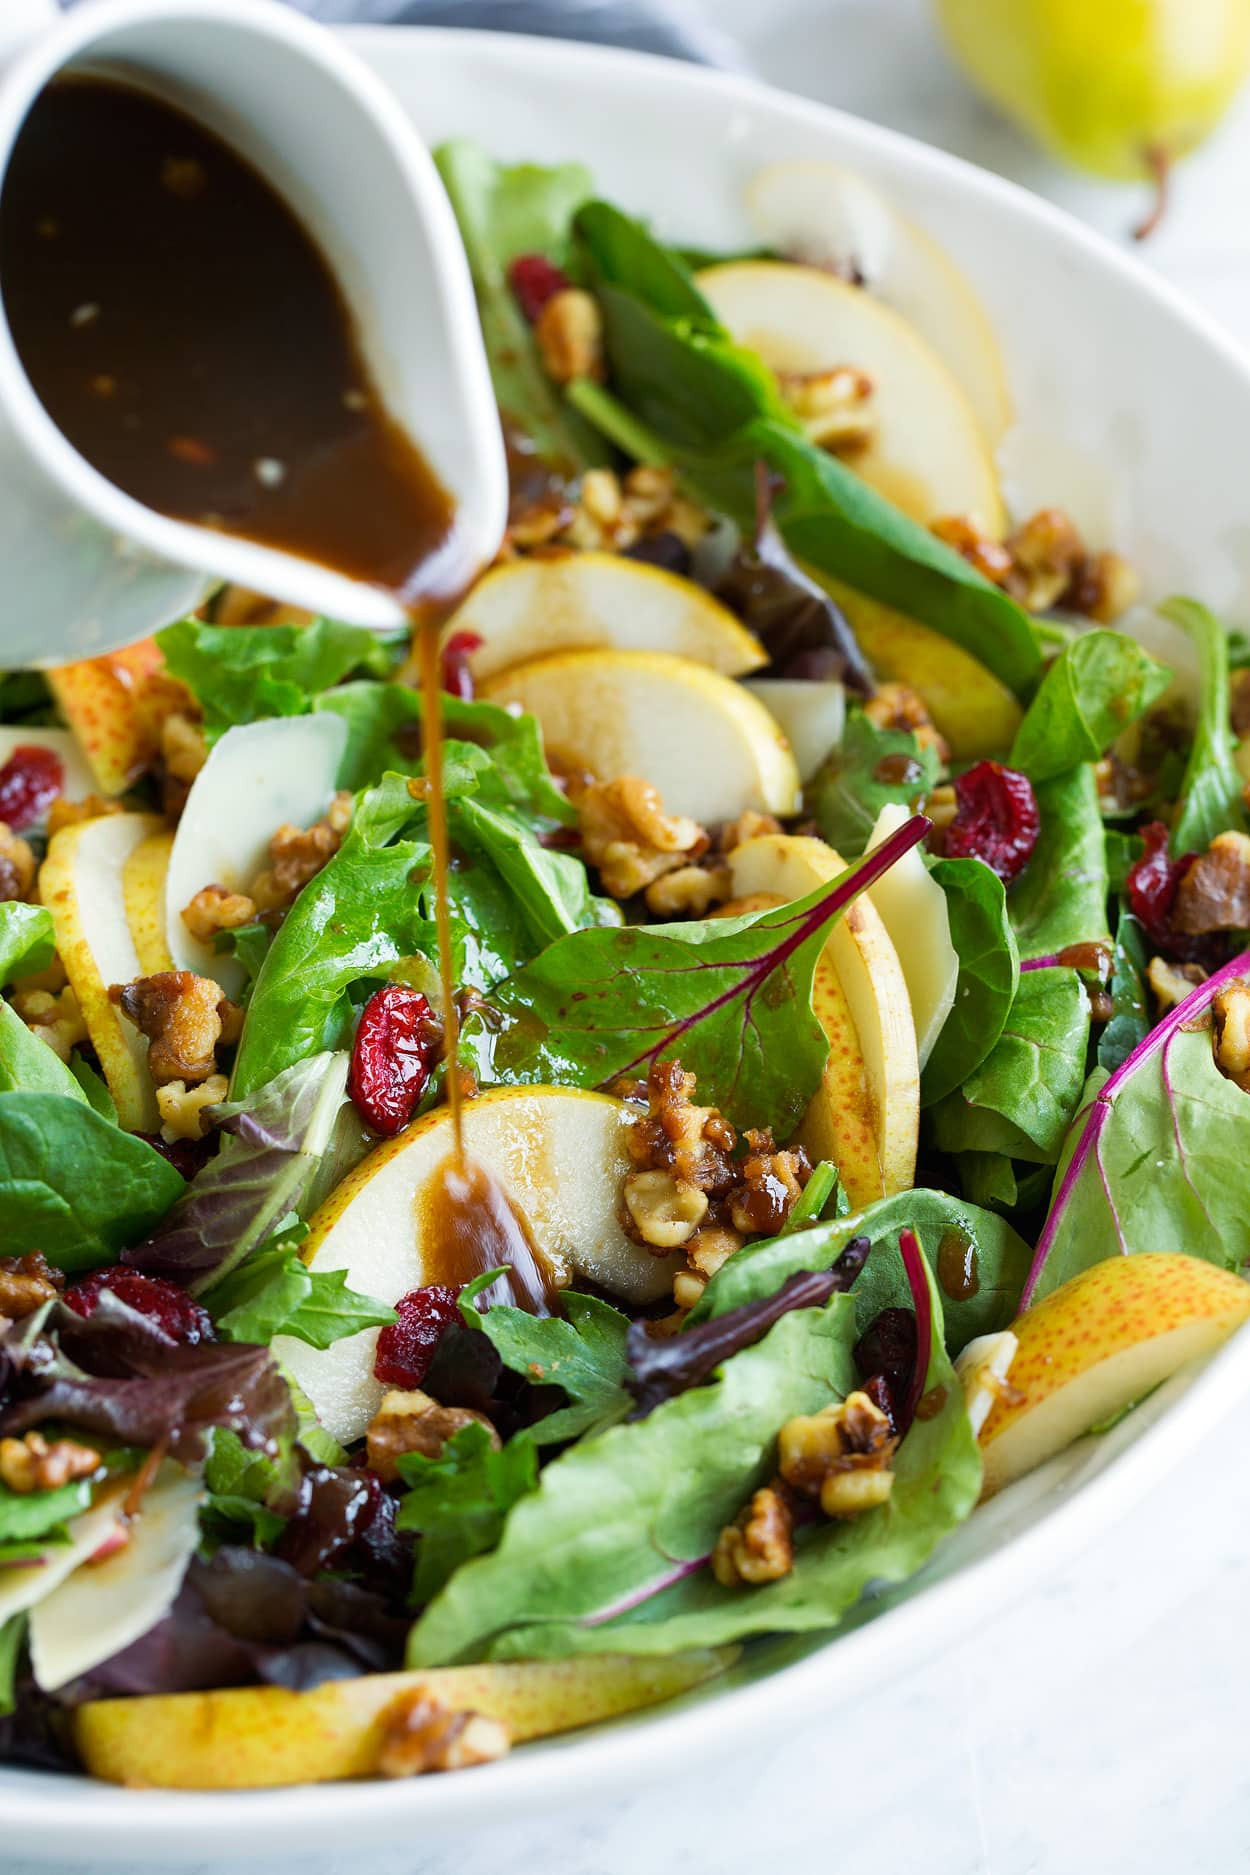 Pear Salad Recipes
 Pear Salad with Balsamic Vinaigrette Cooking Classy